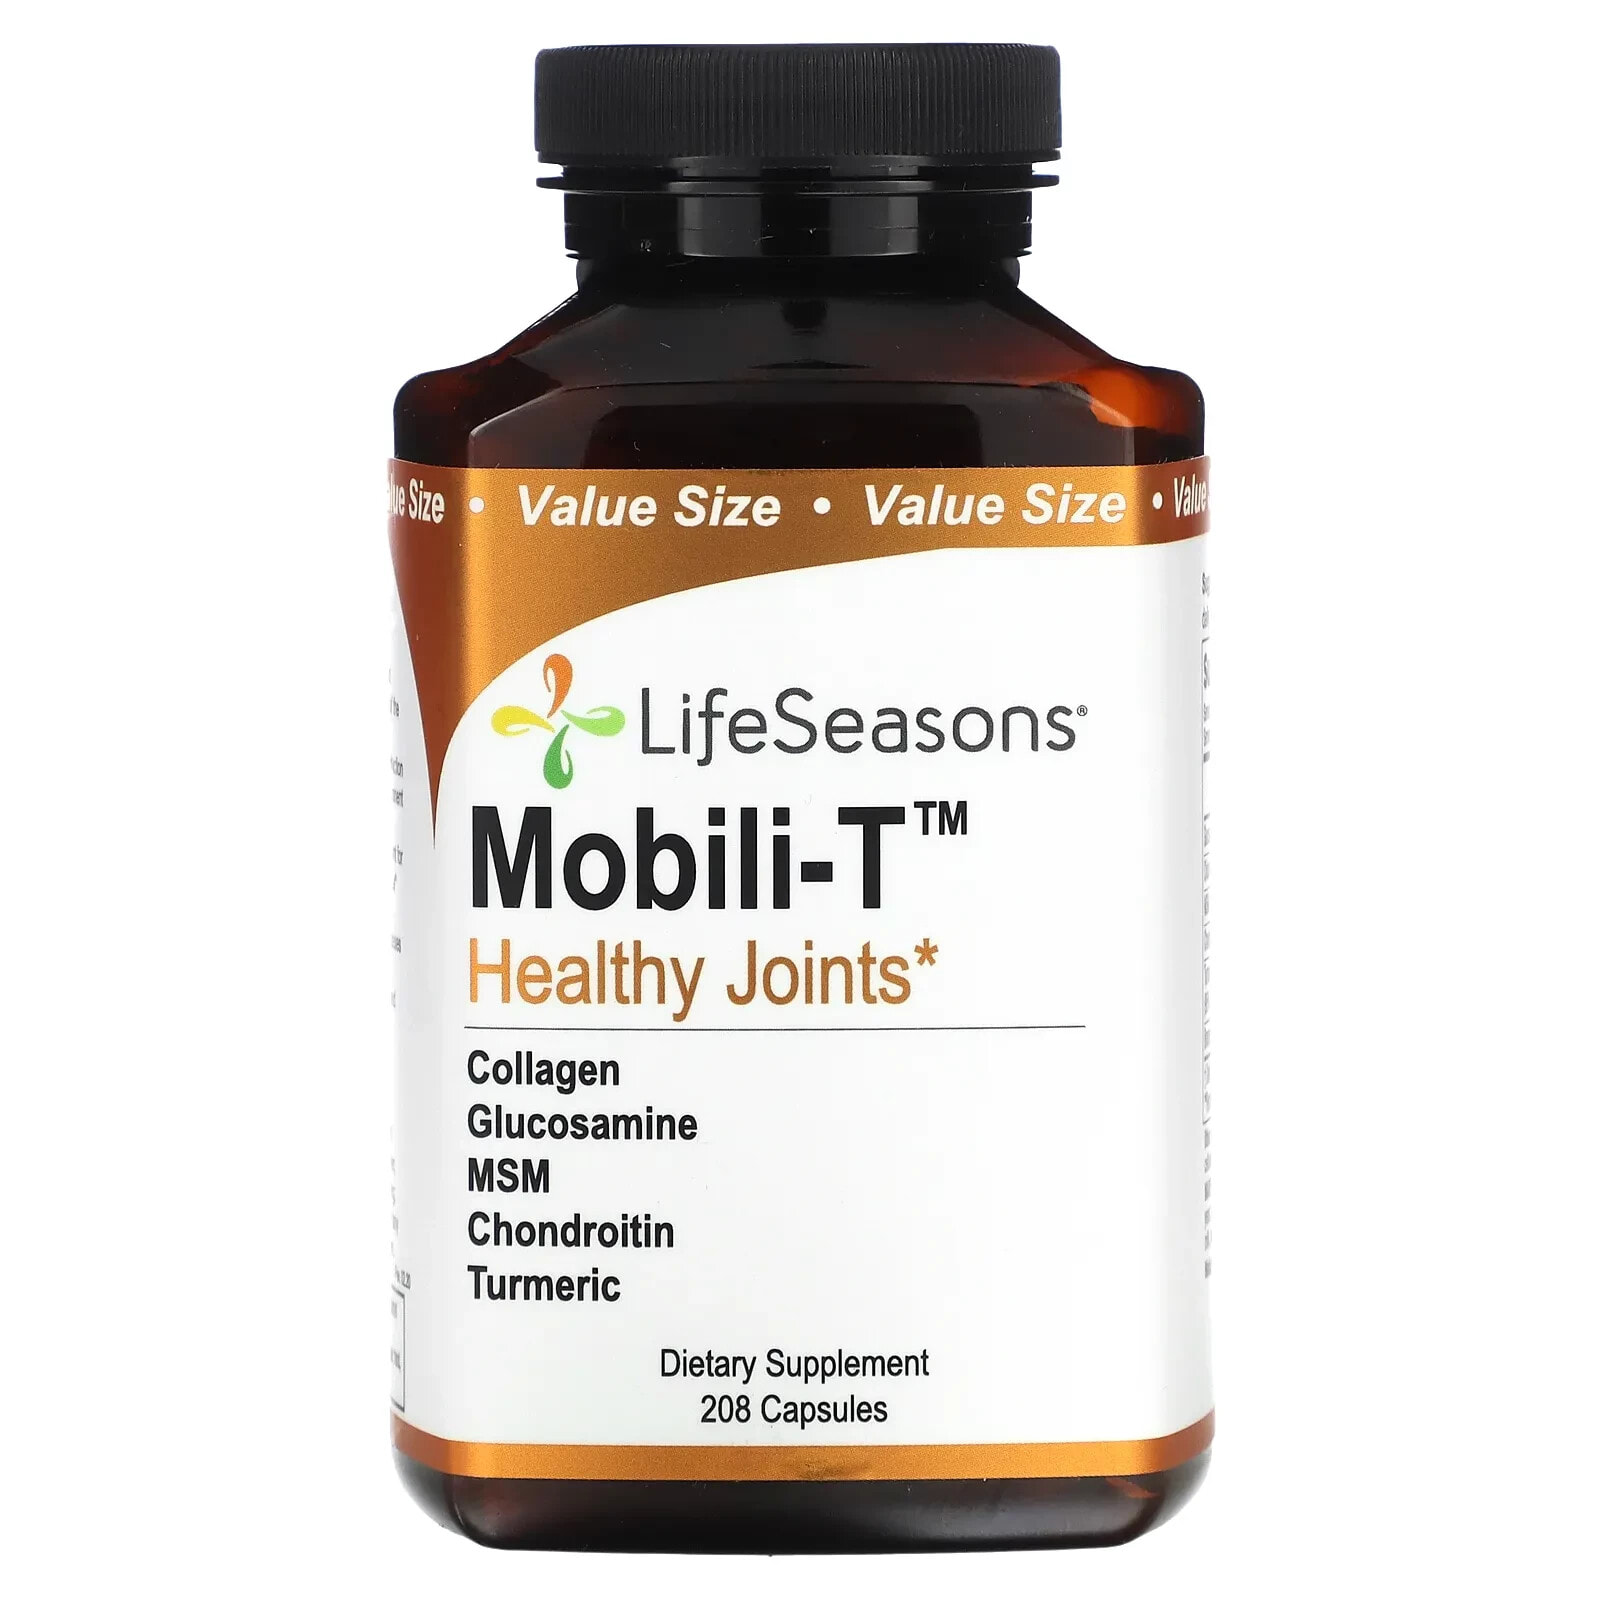 LifeSeasons, Mobili-T Healthy Joints, 208 Capsules